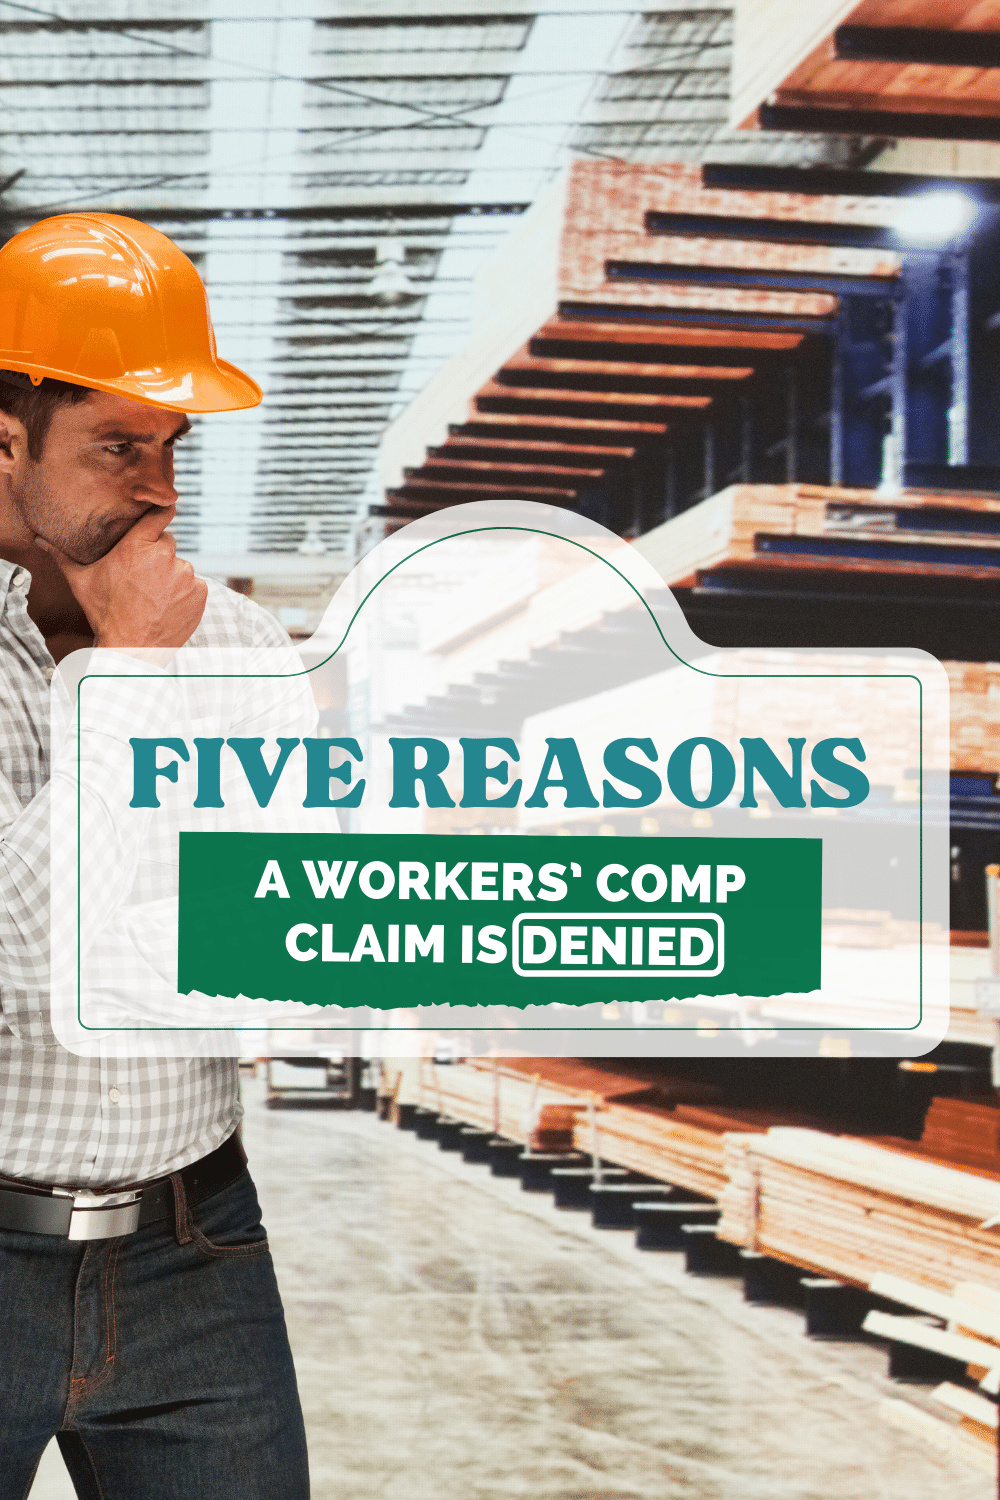 5 Reasons A Workers’ Comp Claim Is Denied: Here Is What To Know